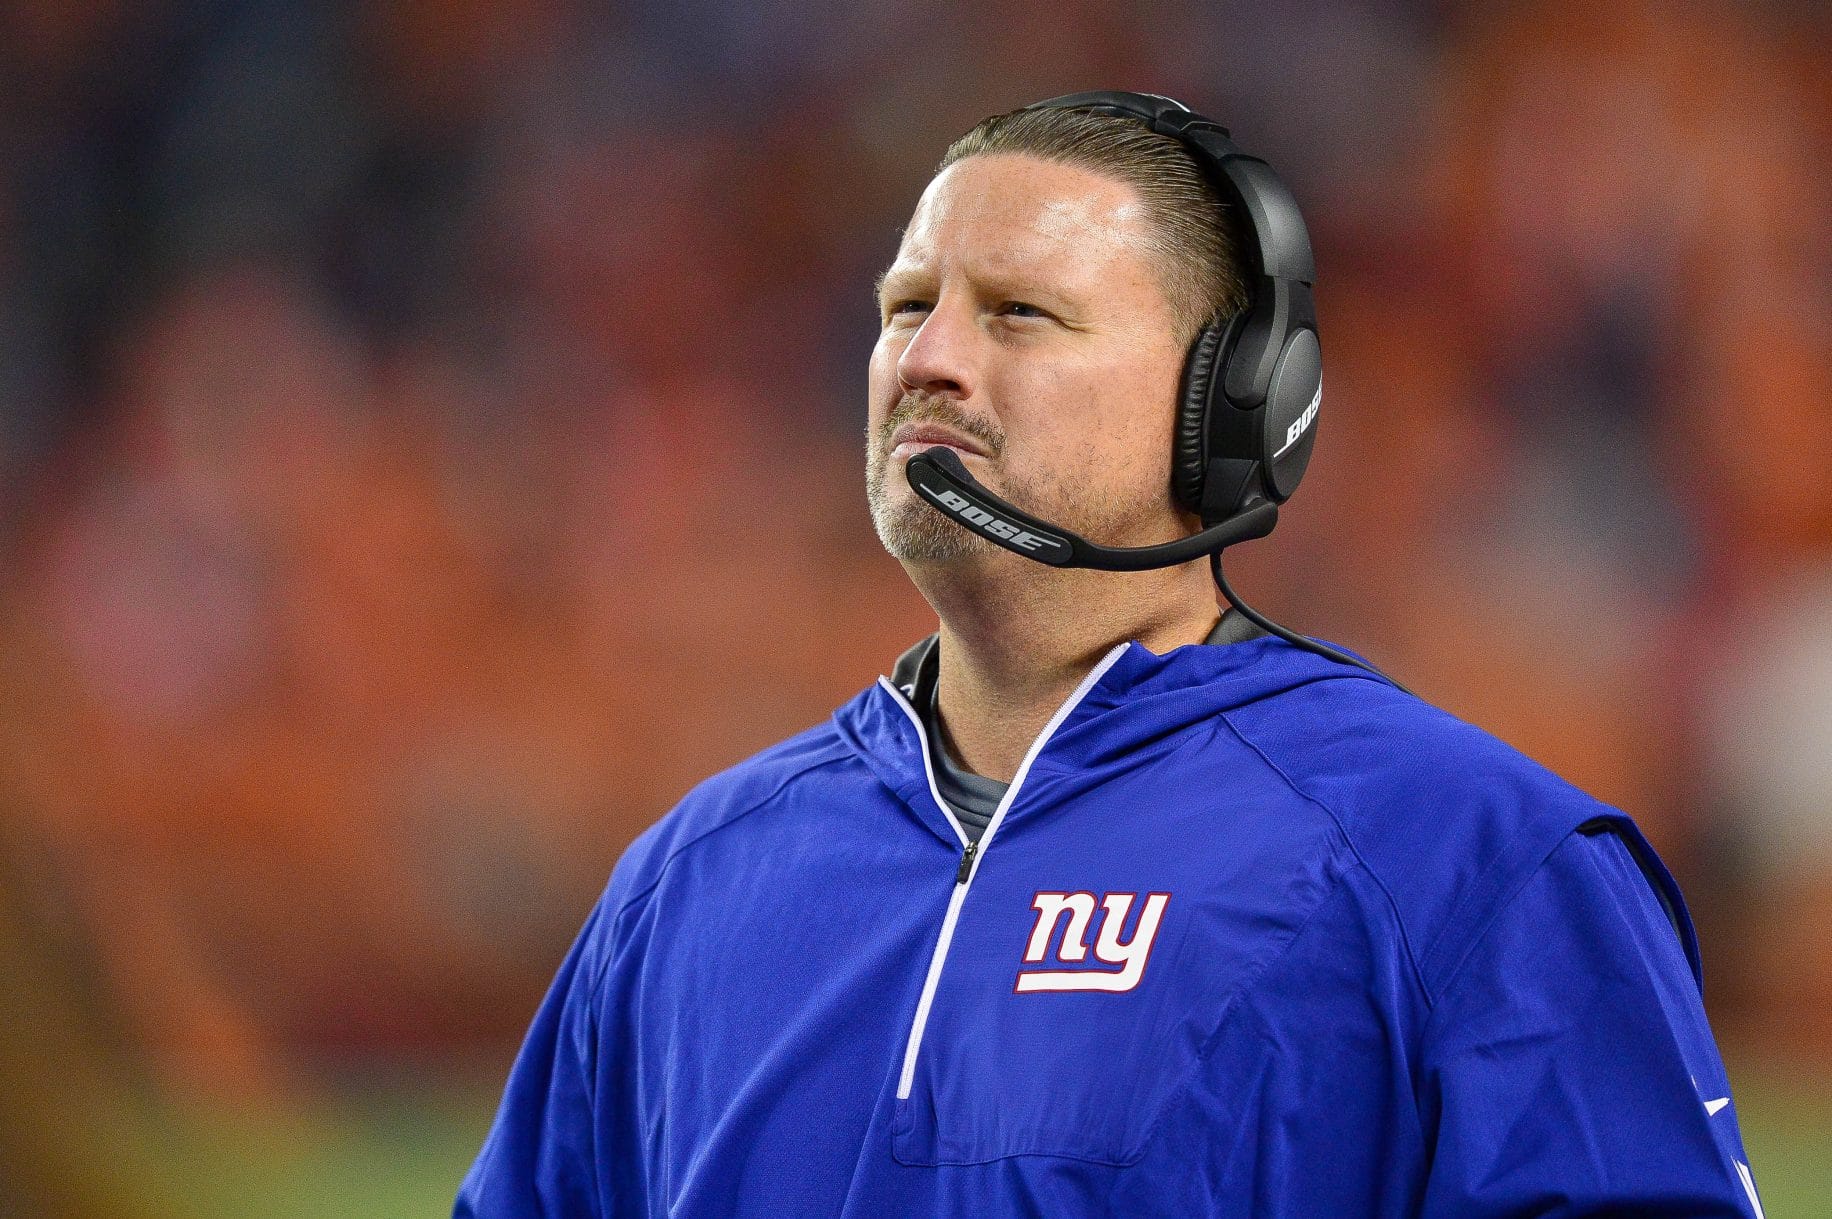 New York Giants: Ben McAdoo could be fired after Oakland game (Report)